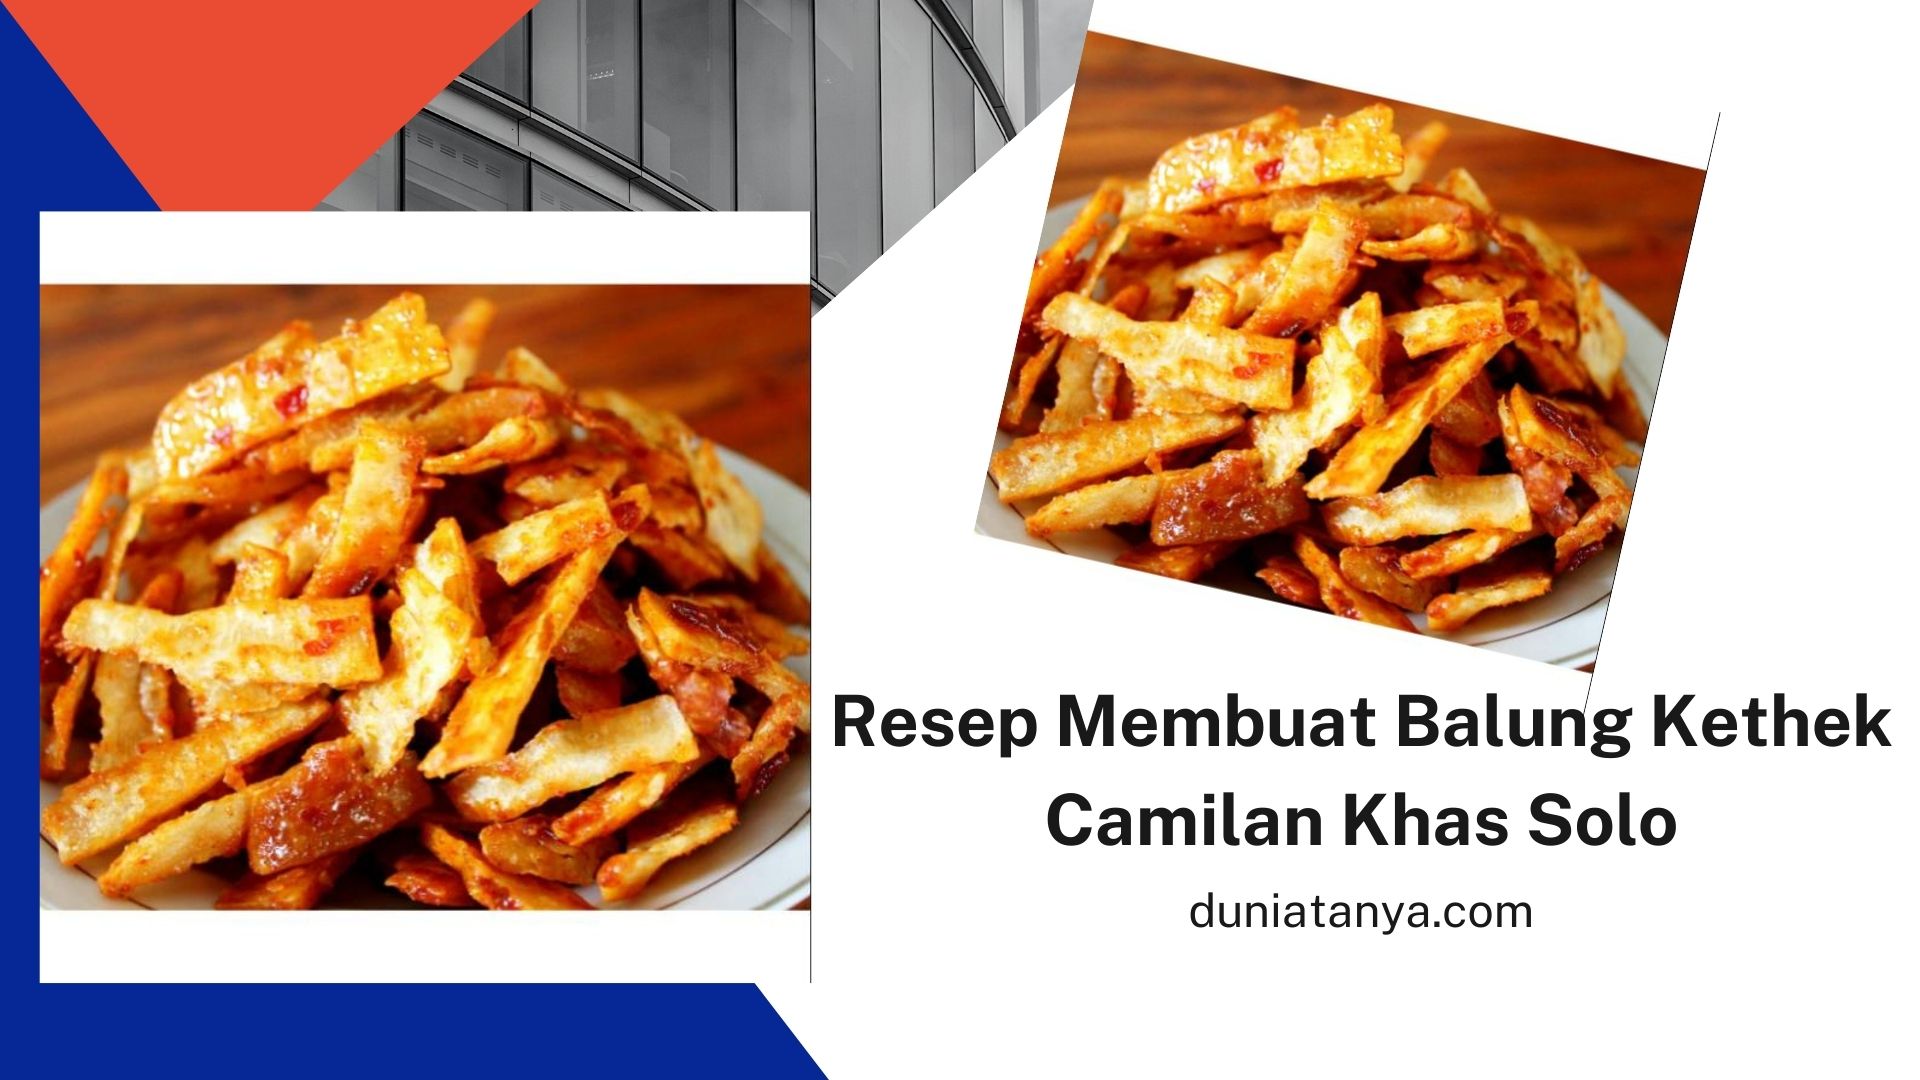 You are currently viewing Resep Membuat Balung Kethek,Camilan Khas Solo